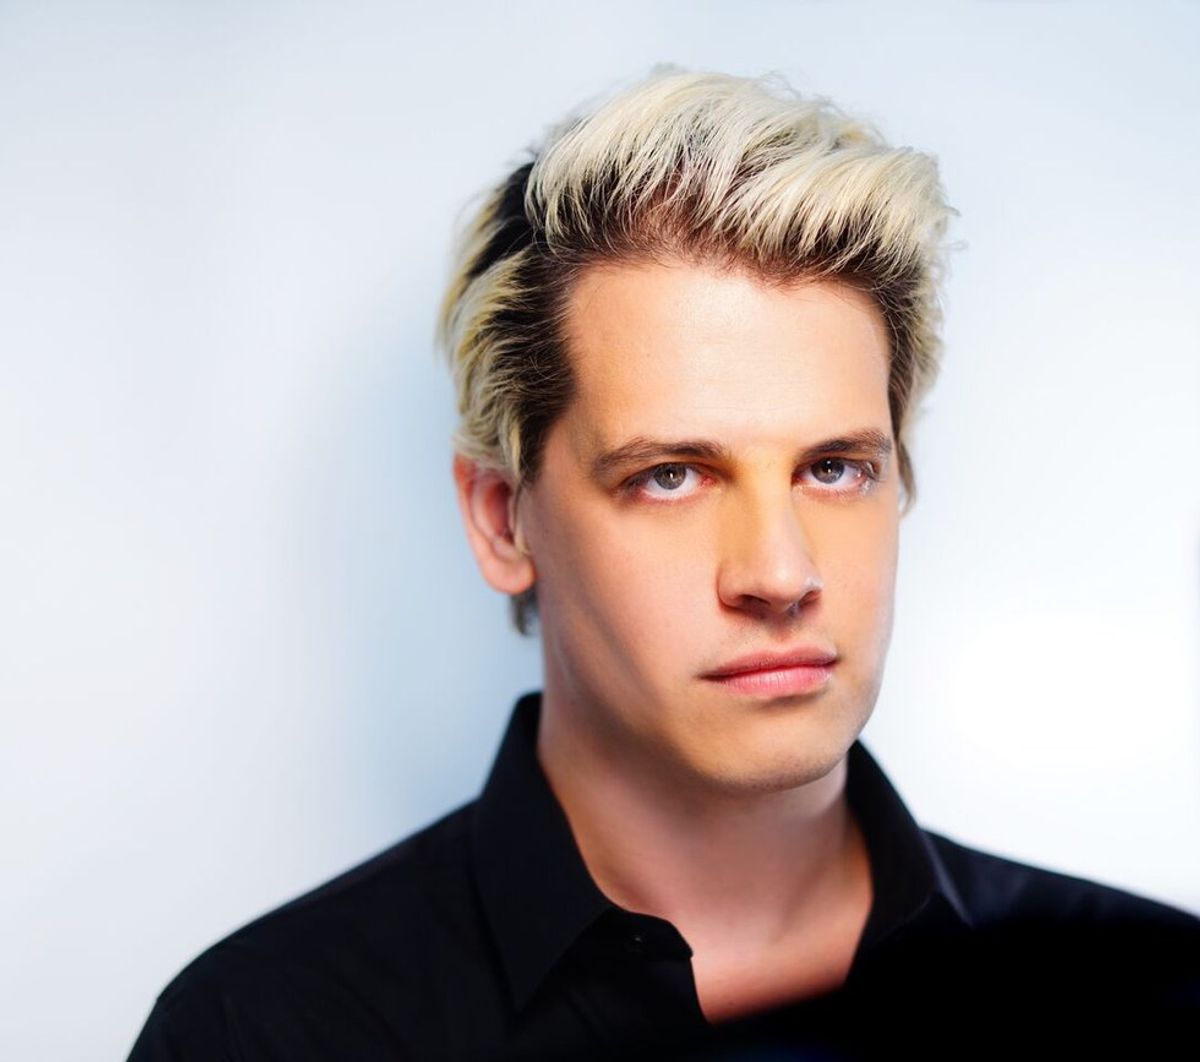 Milo Yiannpoulous And The Crazy World Of Twitter